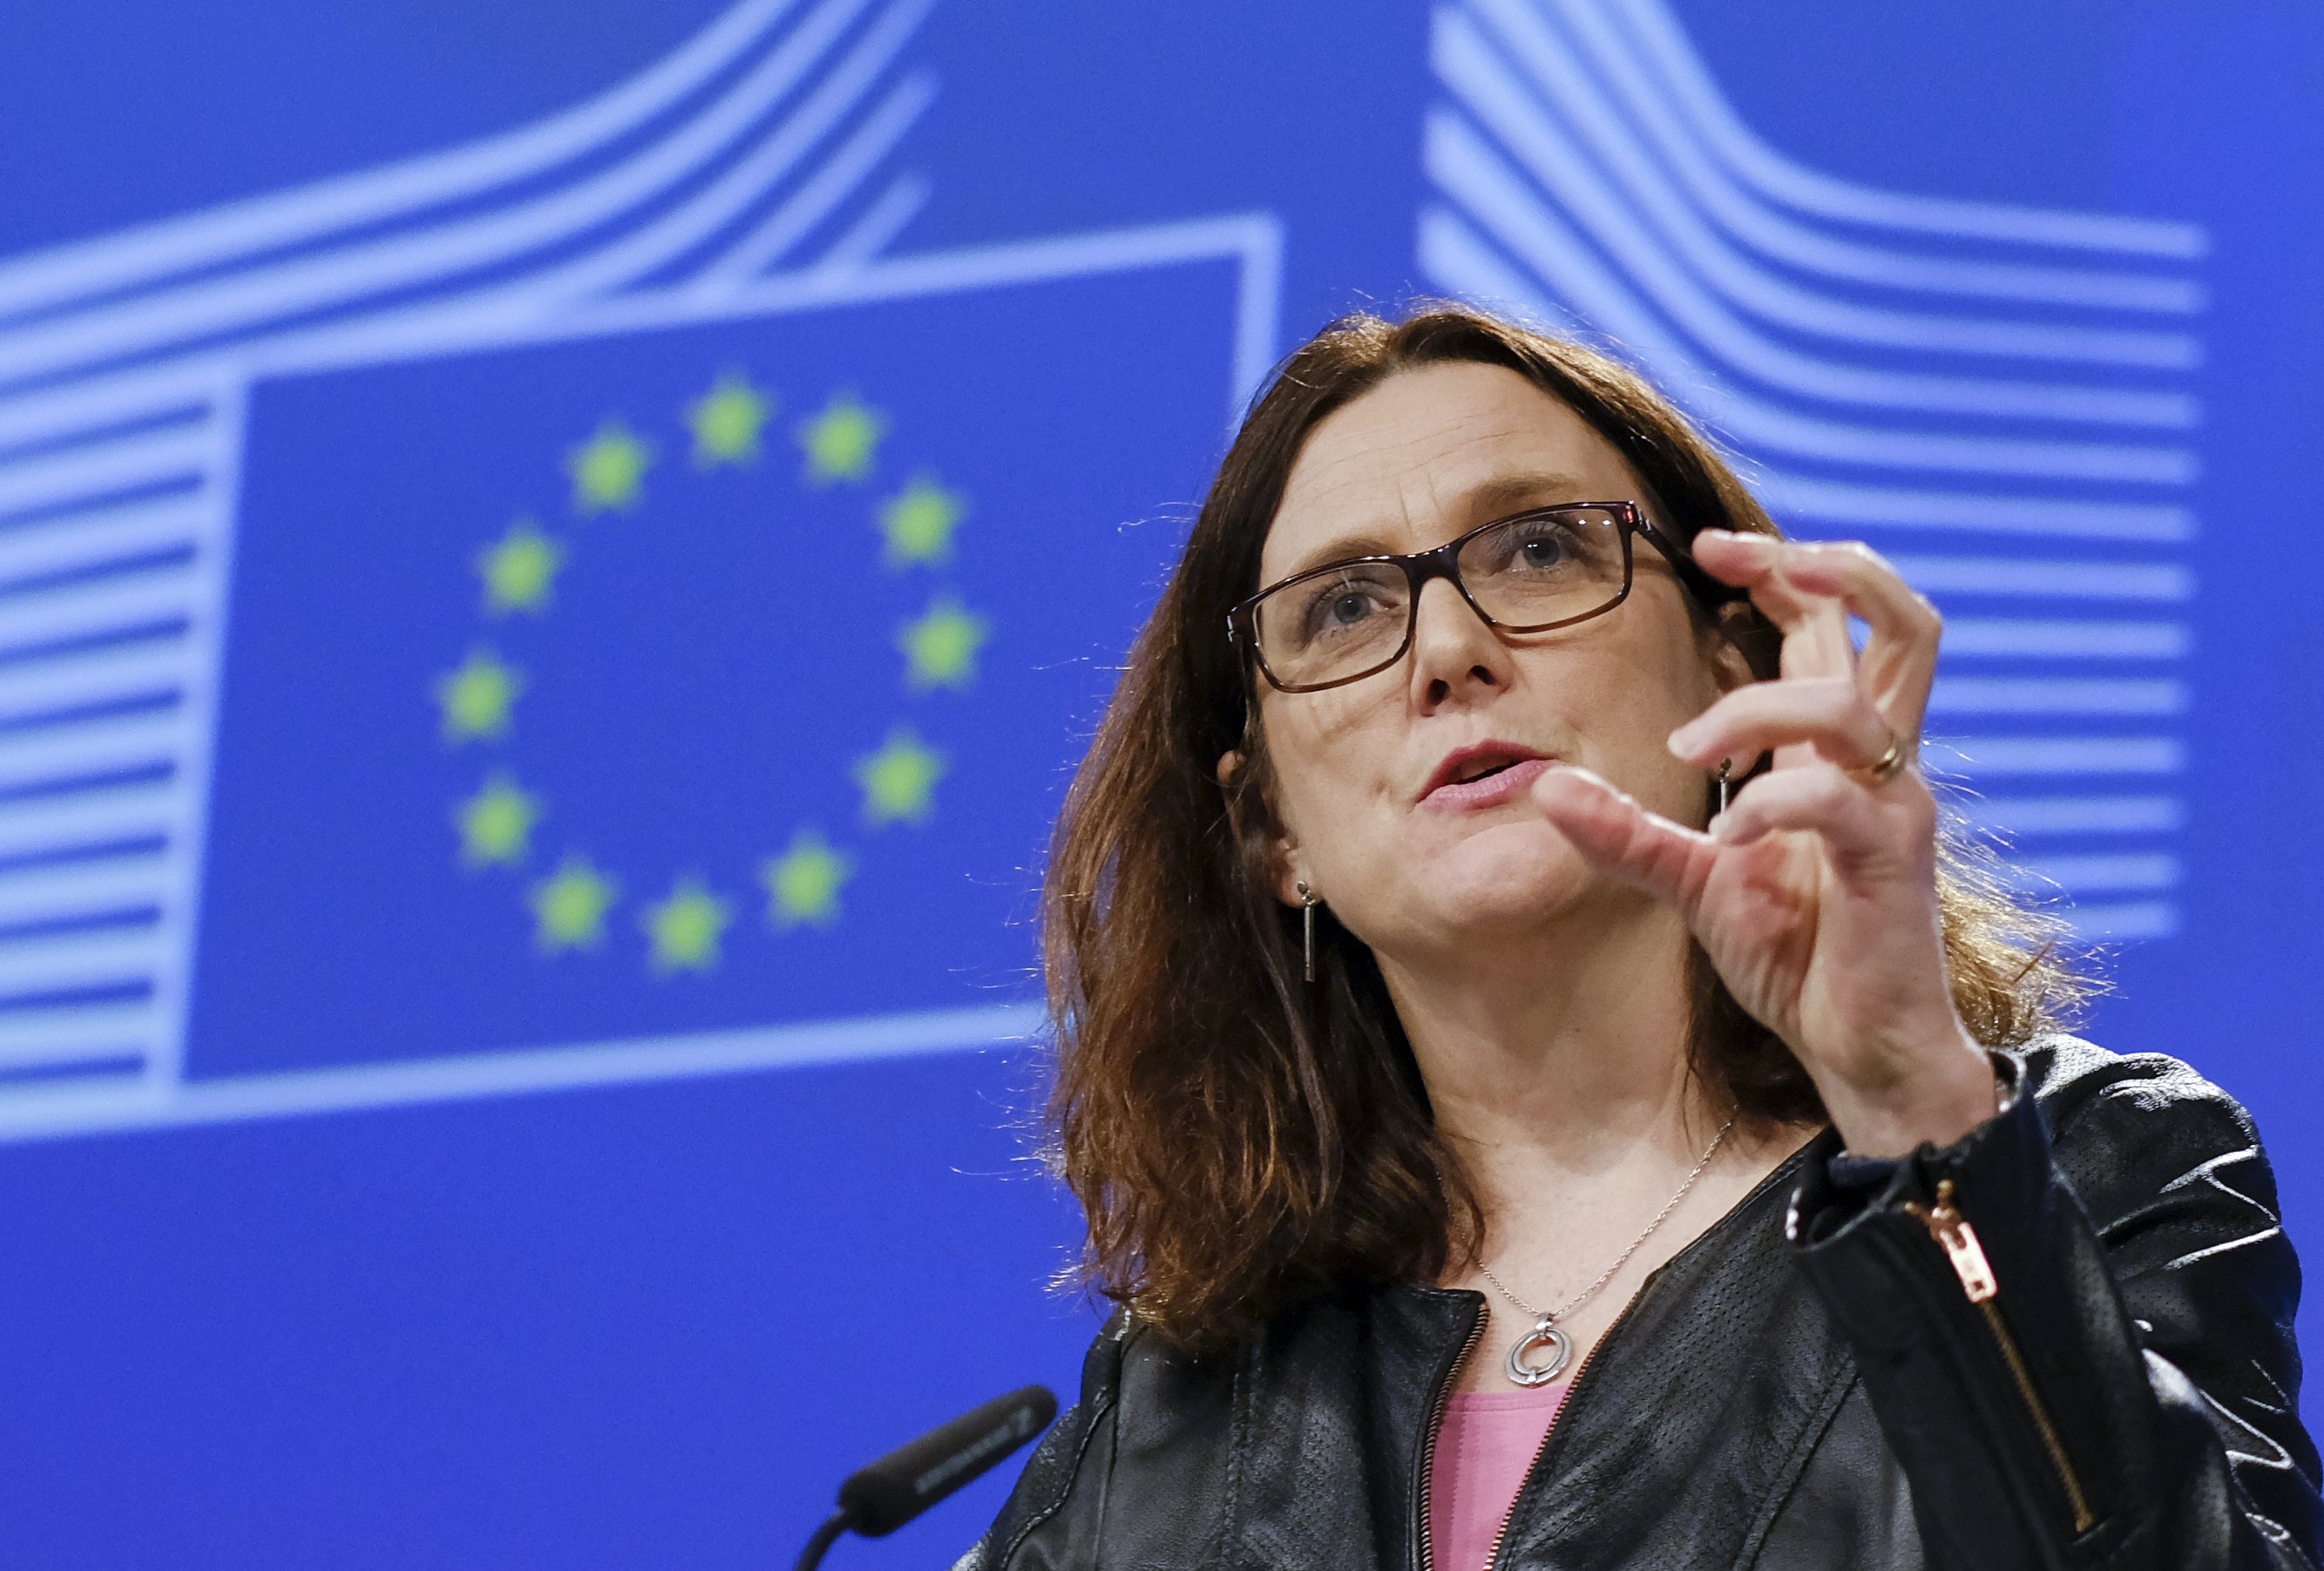 epa06586579 European Commissioner for Trade Cecilia Malmstrom gives a press conference in Brussels, Belgium, 07 March 2018. European Commission responds to the US restrictions on steel and aluminium affecting the EU.  EPA/OLIVIER HOSLET